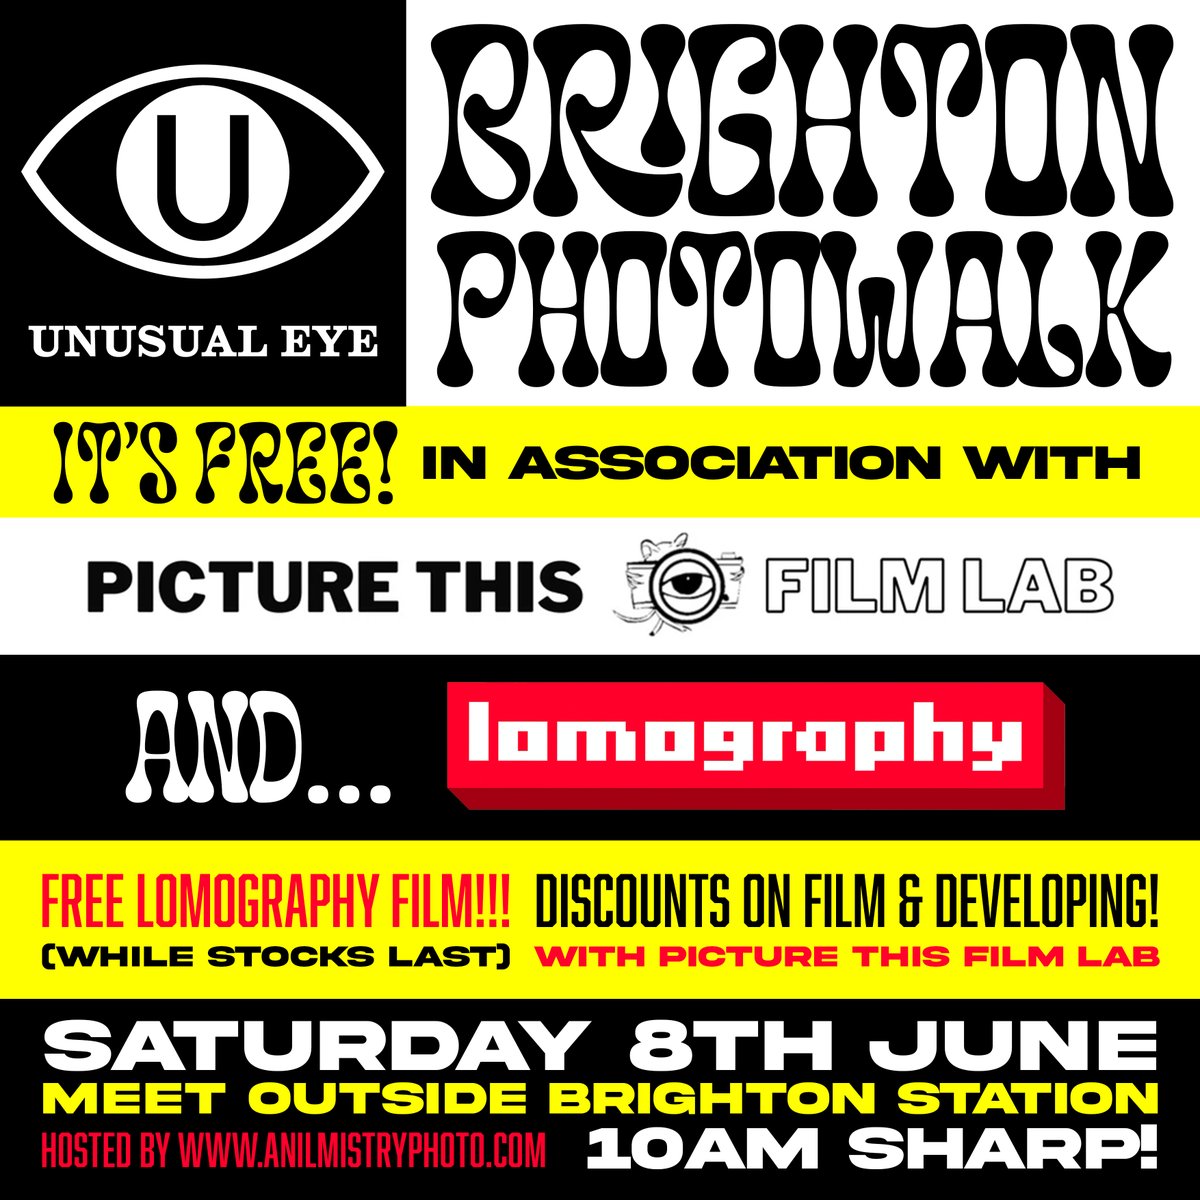 Incoming! I've organised a Brighton Photowalk in association with Picture This Film Lab and @lomographyuk - simply turn up or register at @PhotowalkMe - see you there! #filmphotography #photography #believeinfilm #photowalk #streetphotography